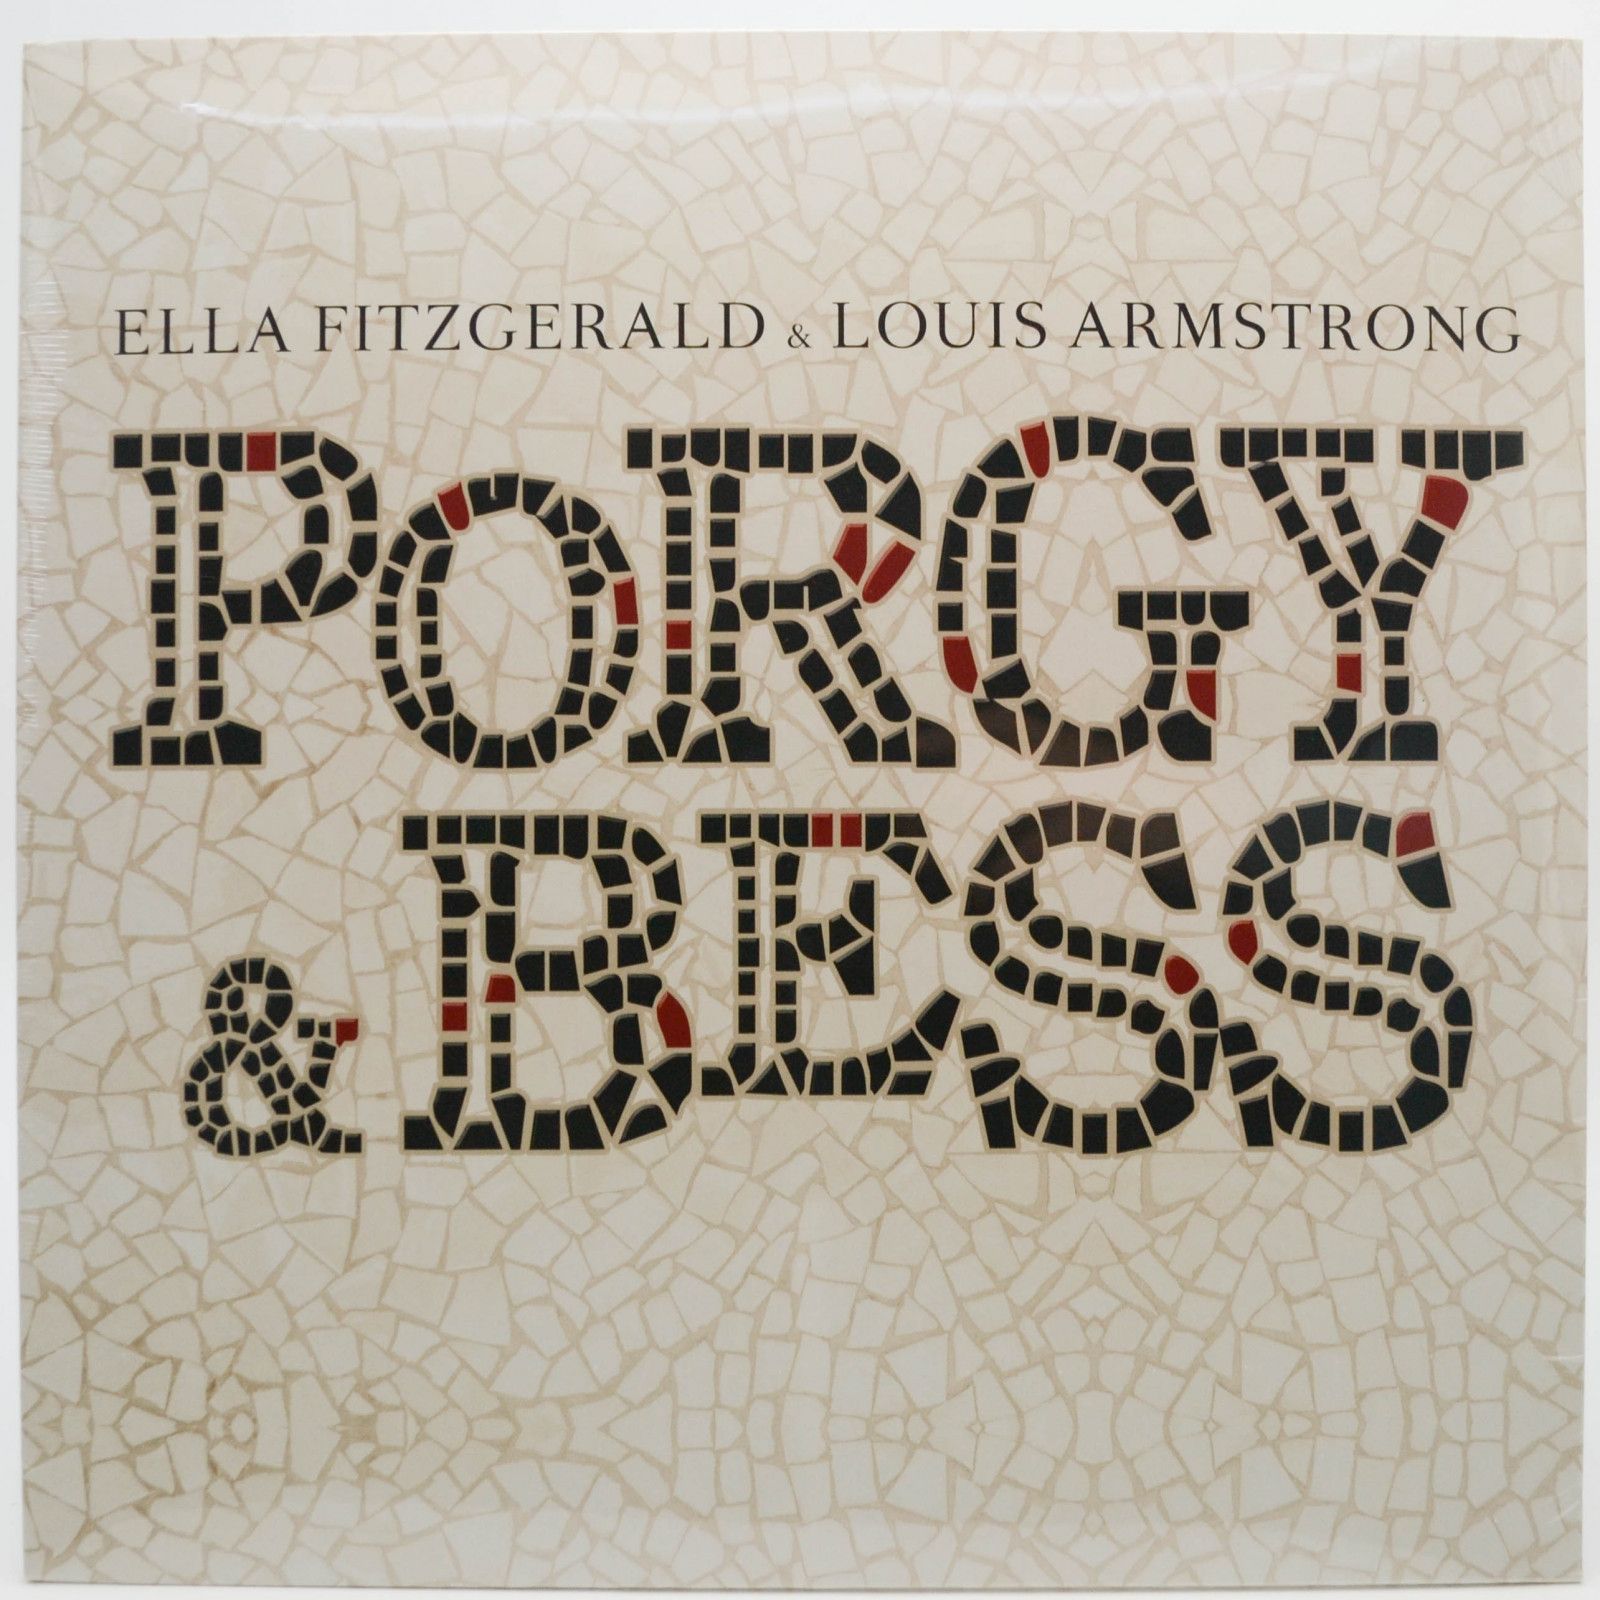 Ella Fitzgerald And Louis Armstrong — Porgy & Bess, 1959